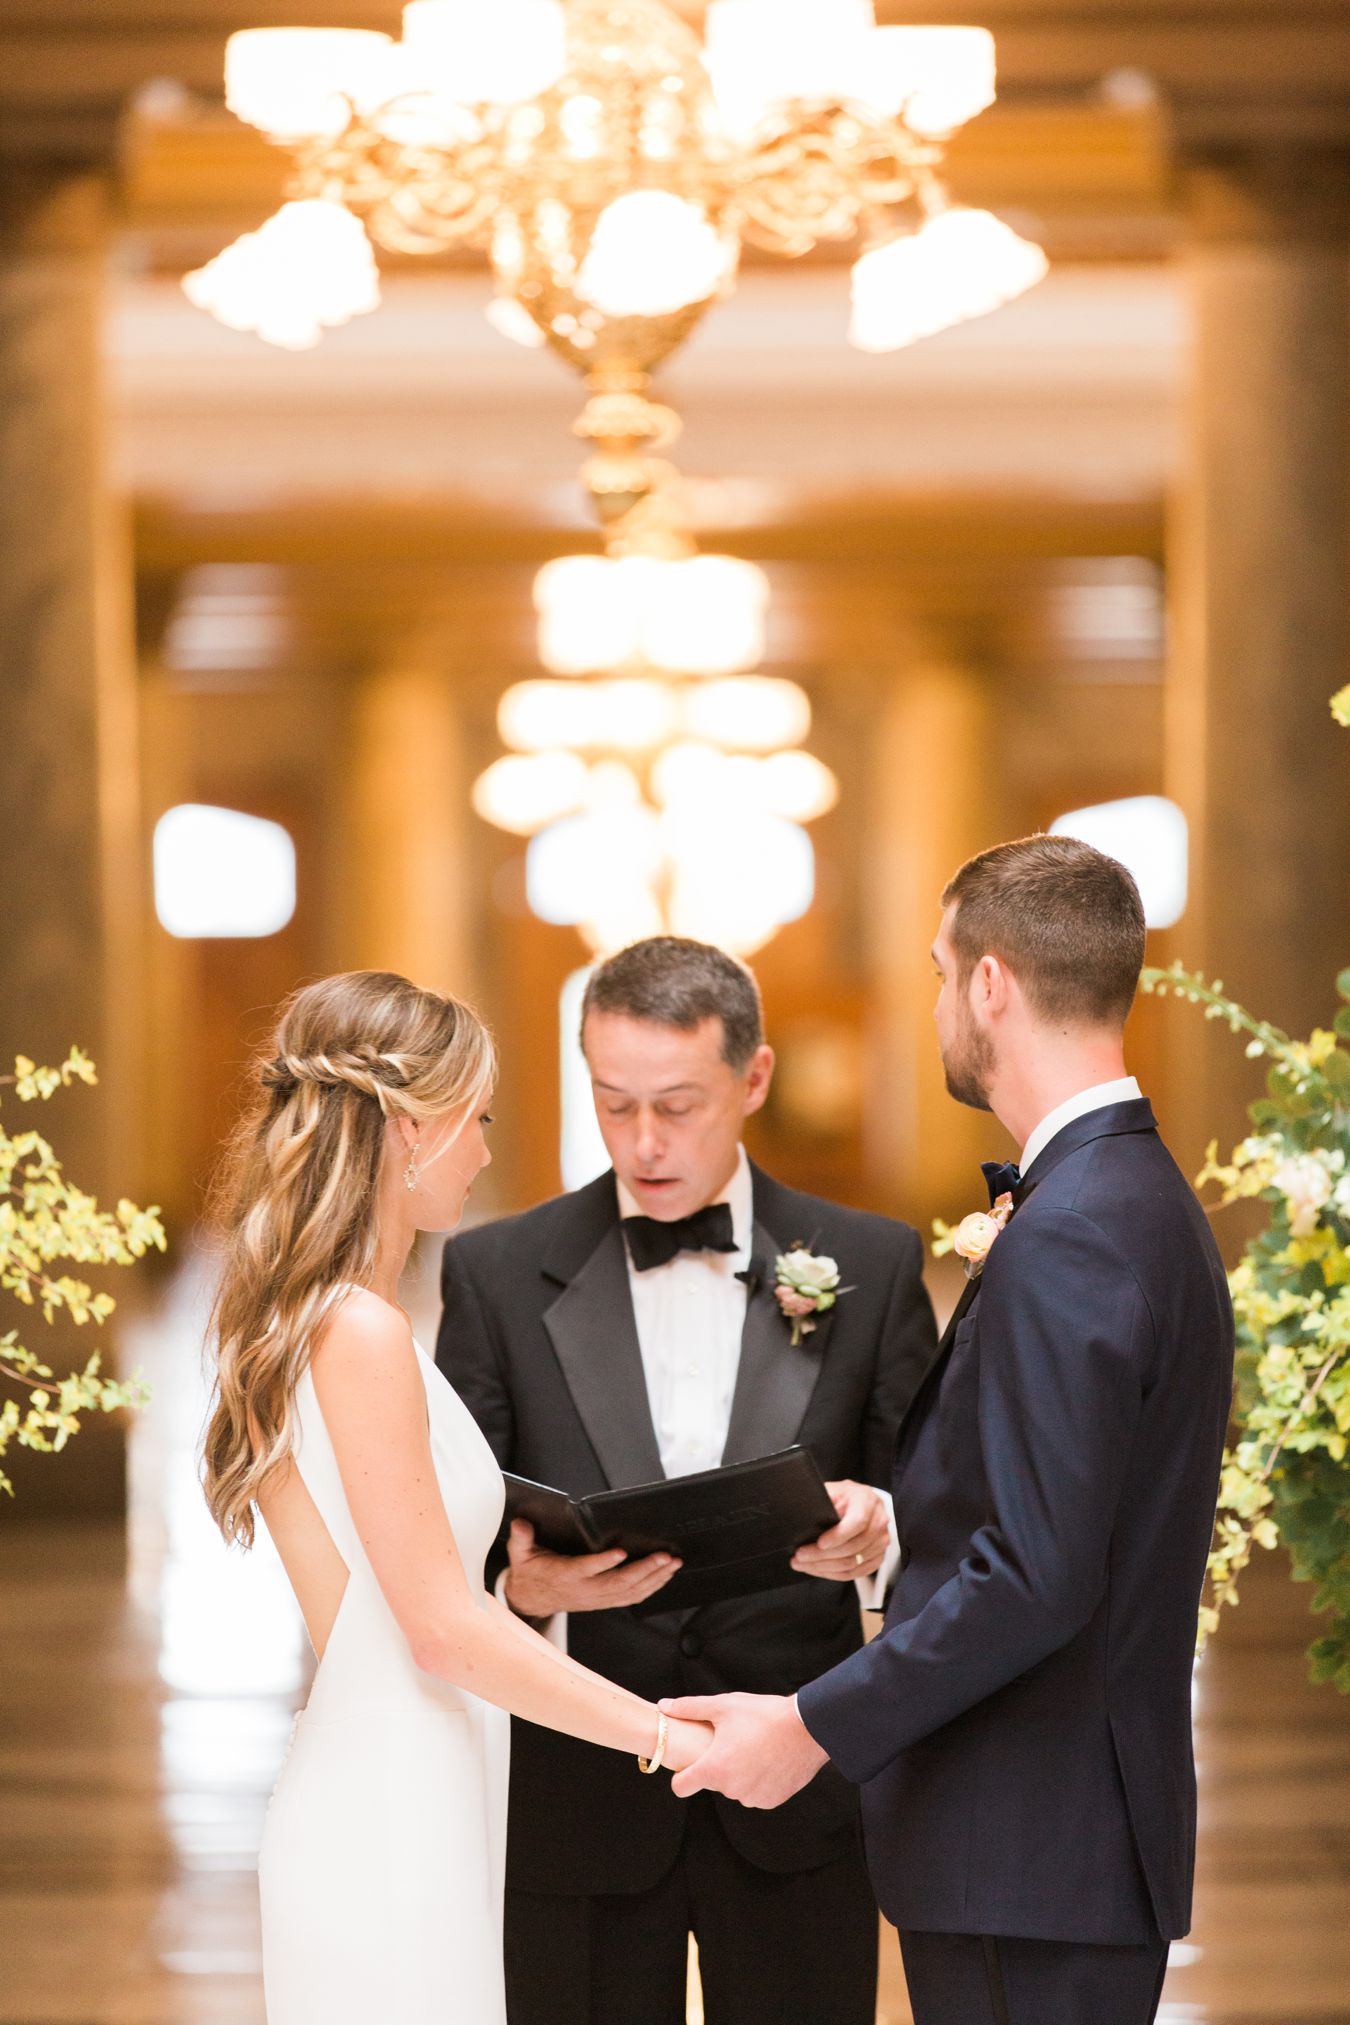 State Capital Building Indianapolis Wedding Photography | Cory Weber Photography 